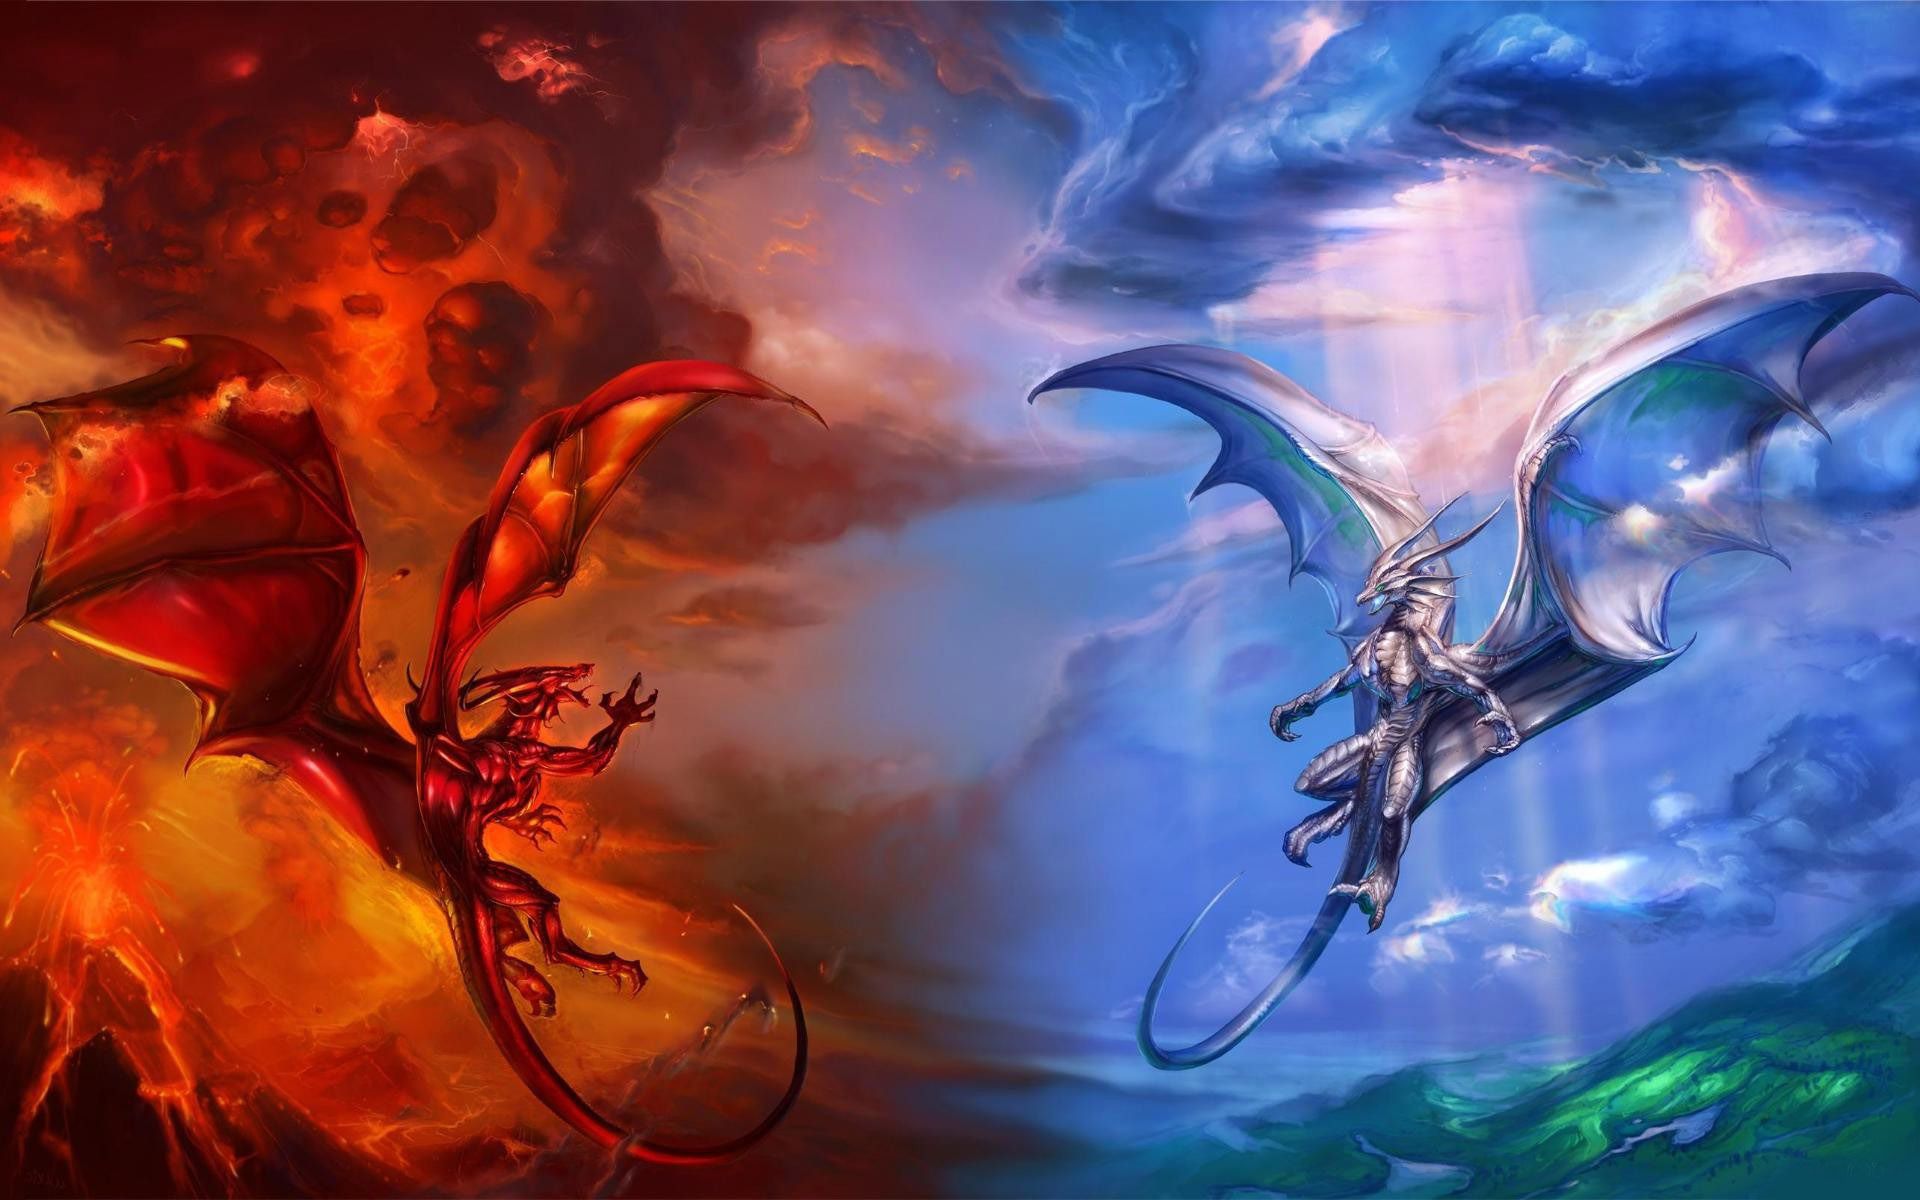 Dragons. Fire and ice dragons, Dragon picture, Dragon fight